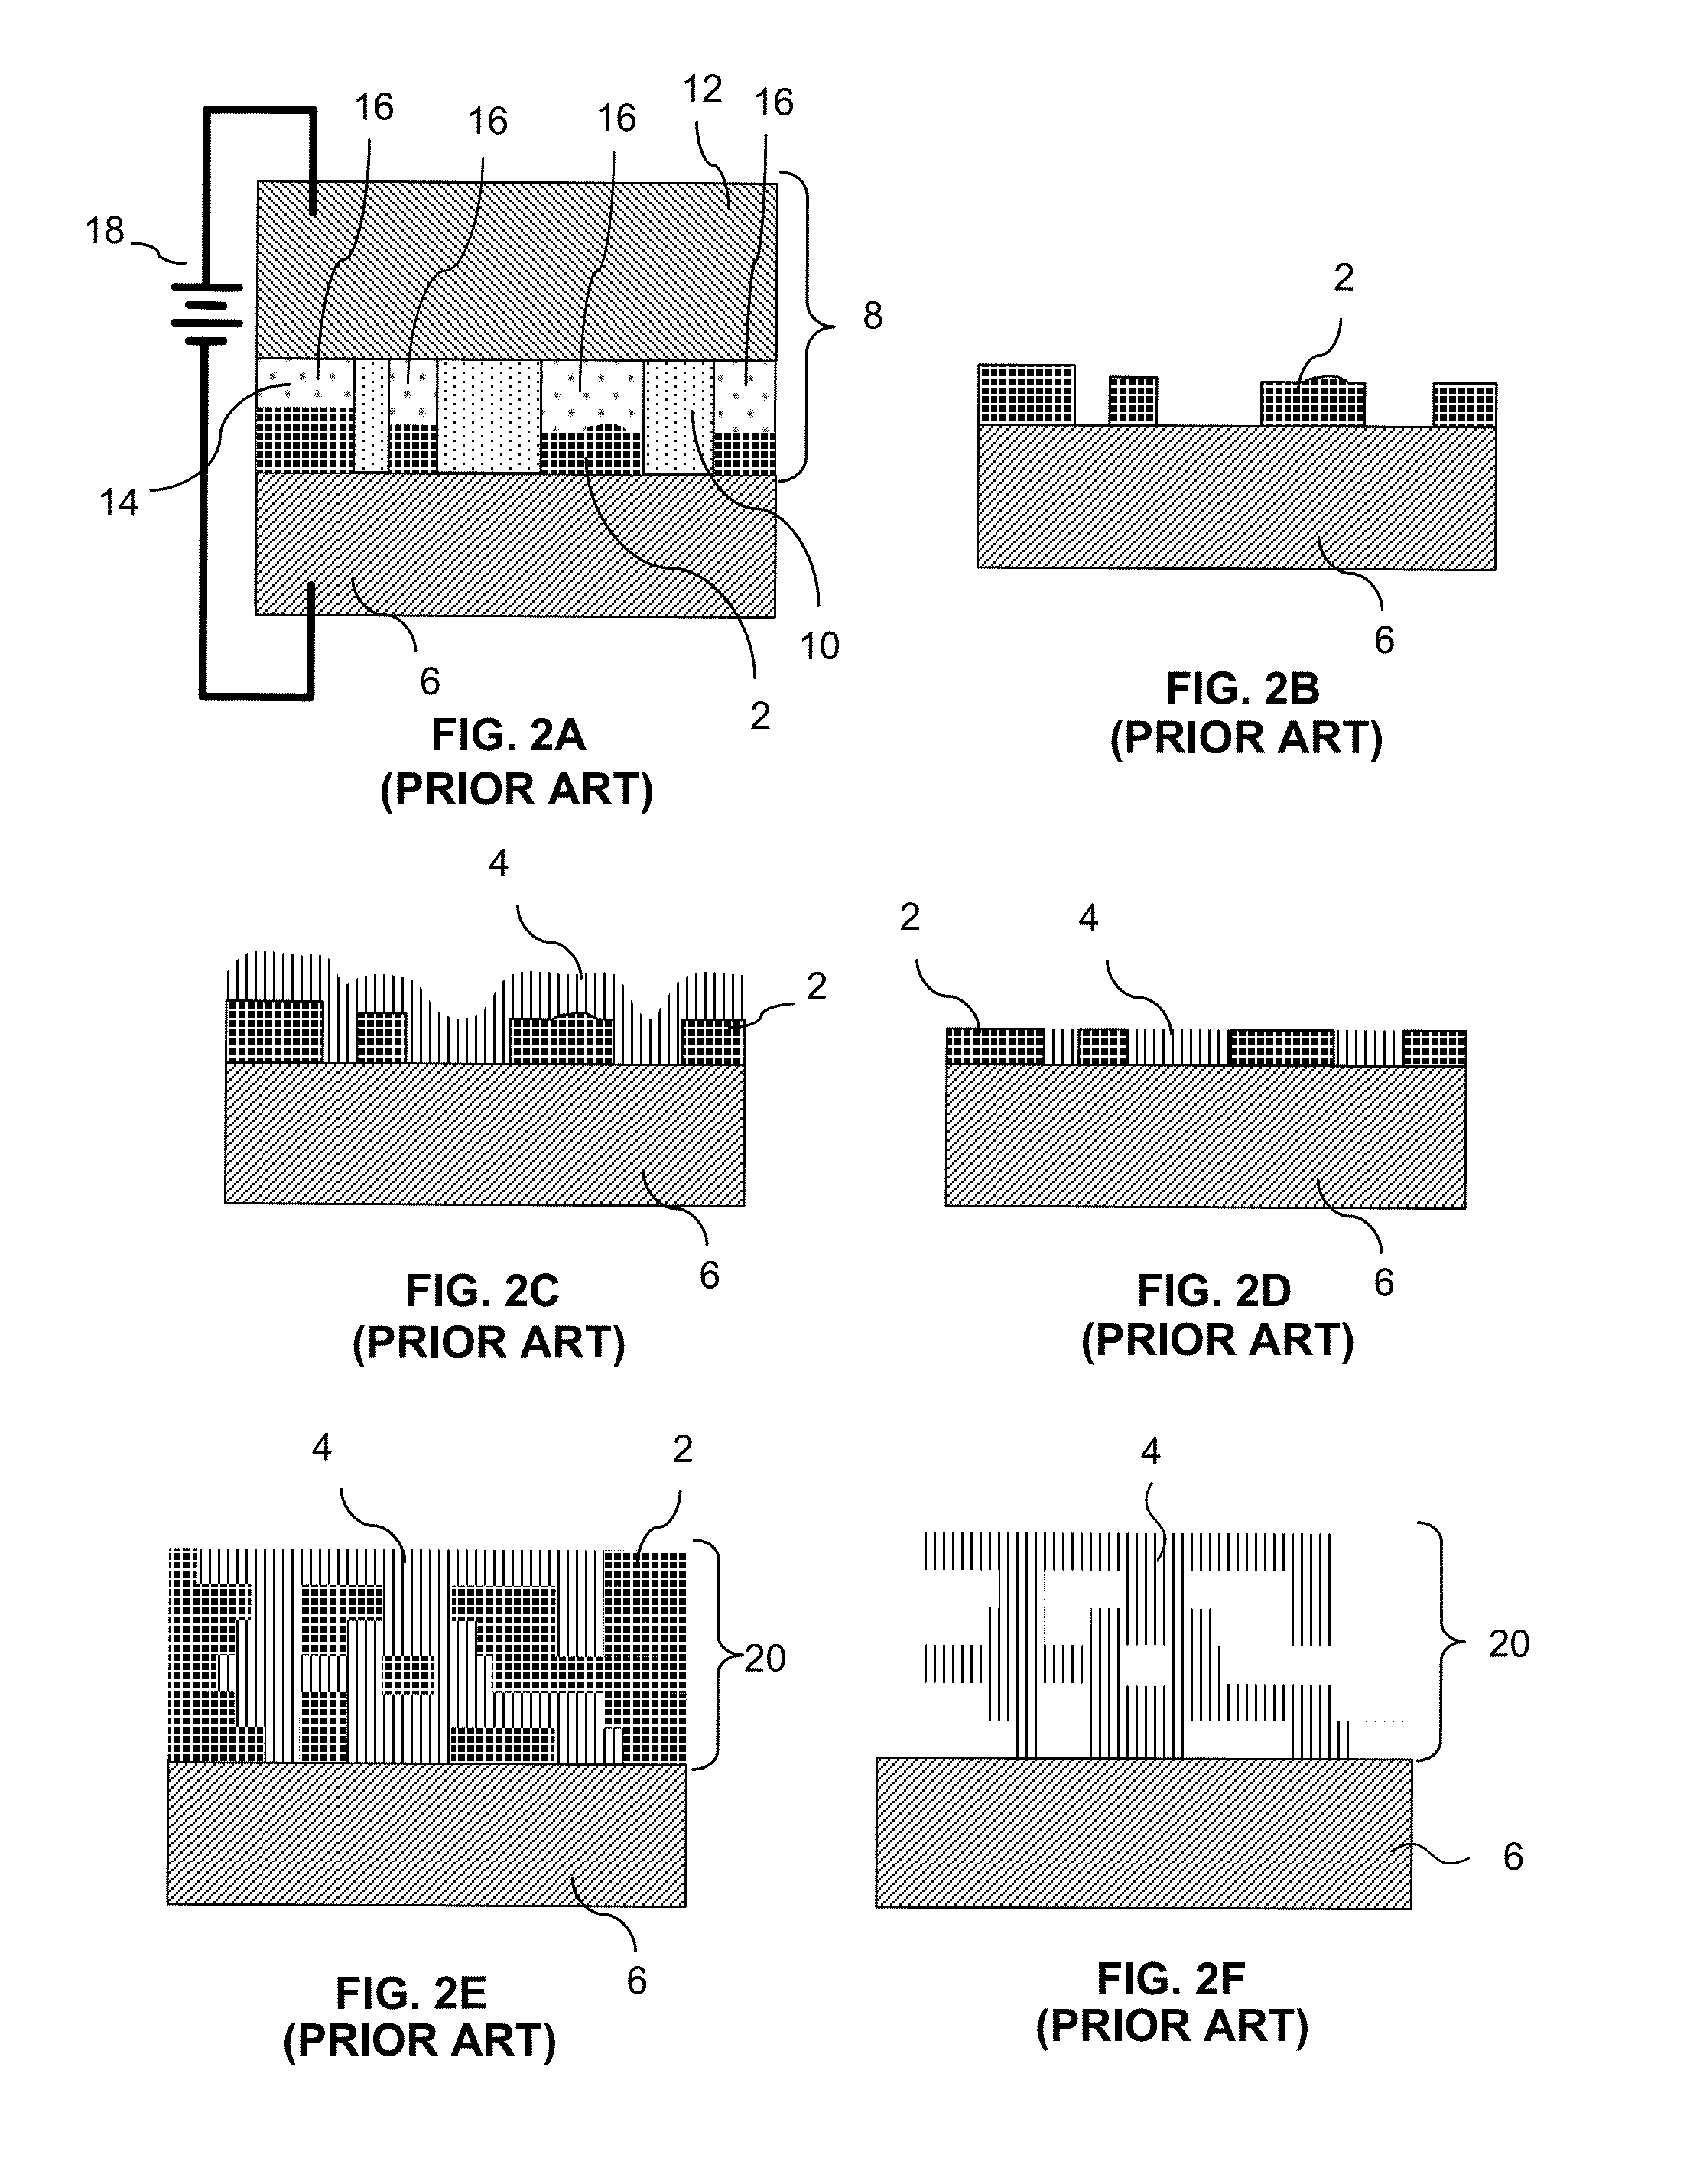 Electrochemical Fabrication Process for Forming Multilayer Multimaterial Microprobe Structures Incorporating Dielectrics